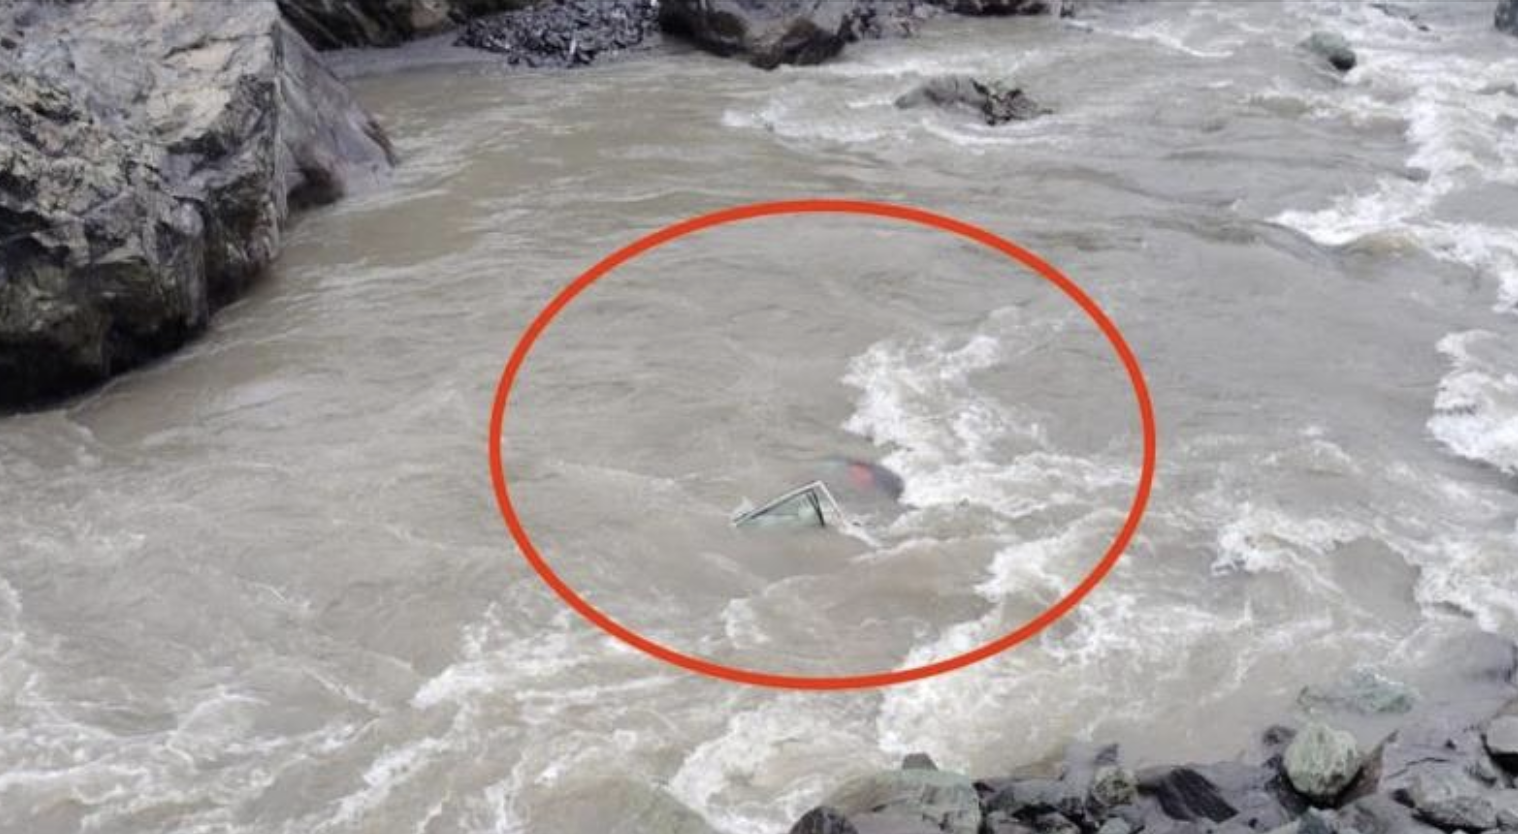 Sonamarg accident: Four bodies retrieved, rest missing; operation called off amid heavy rains